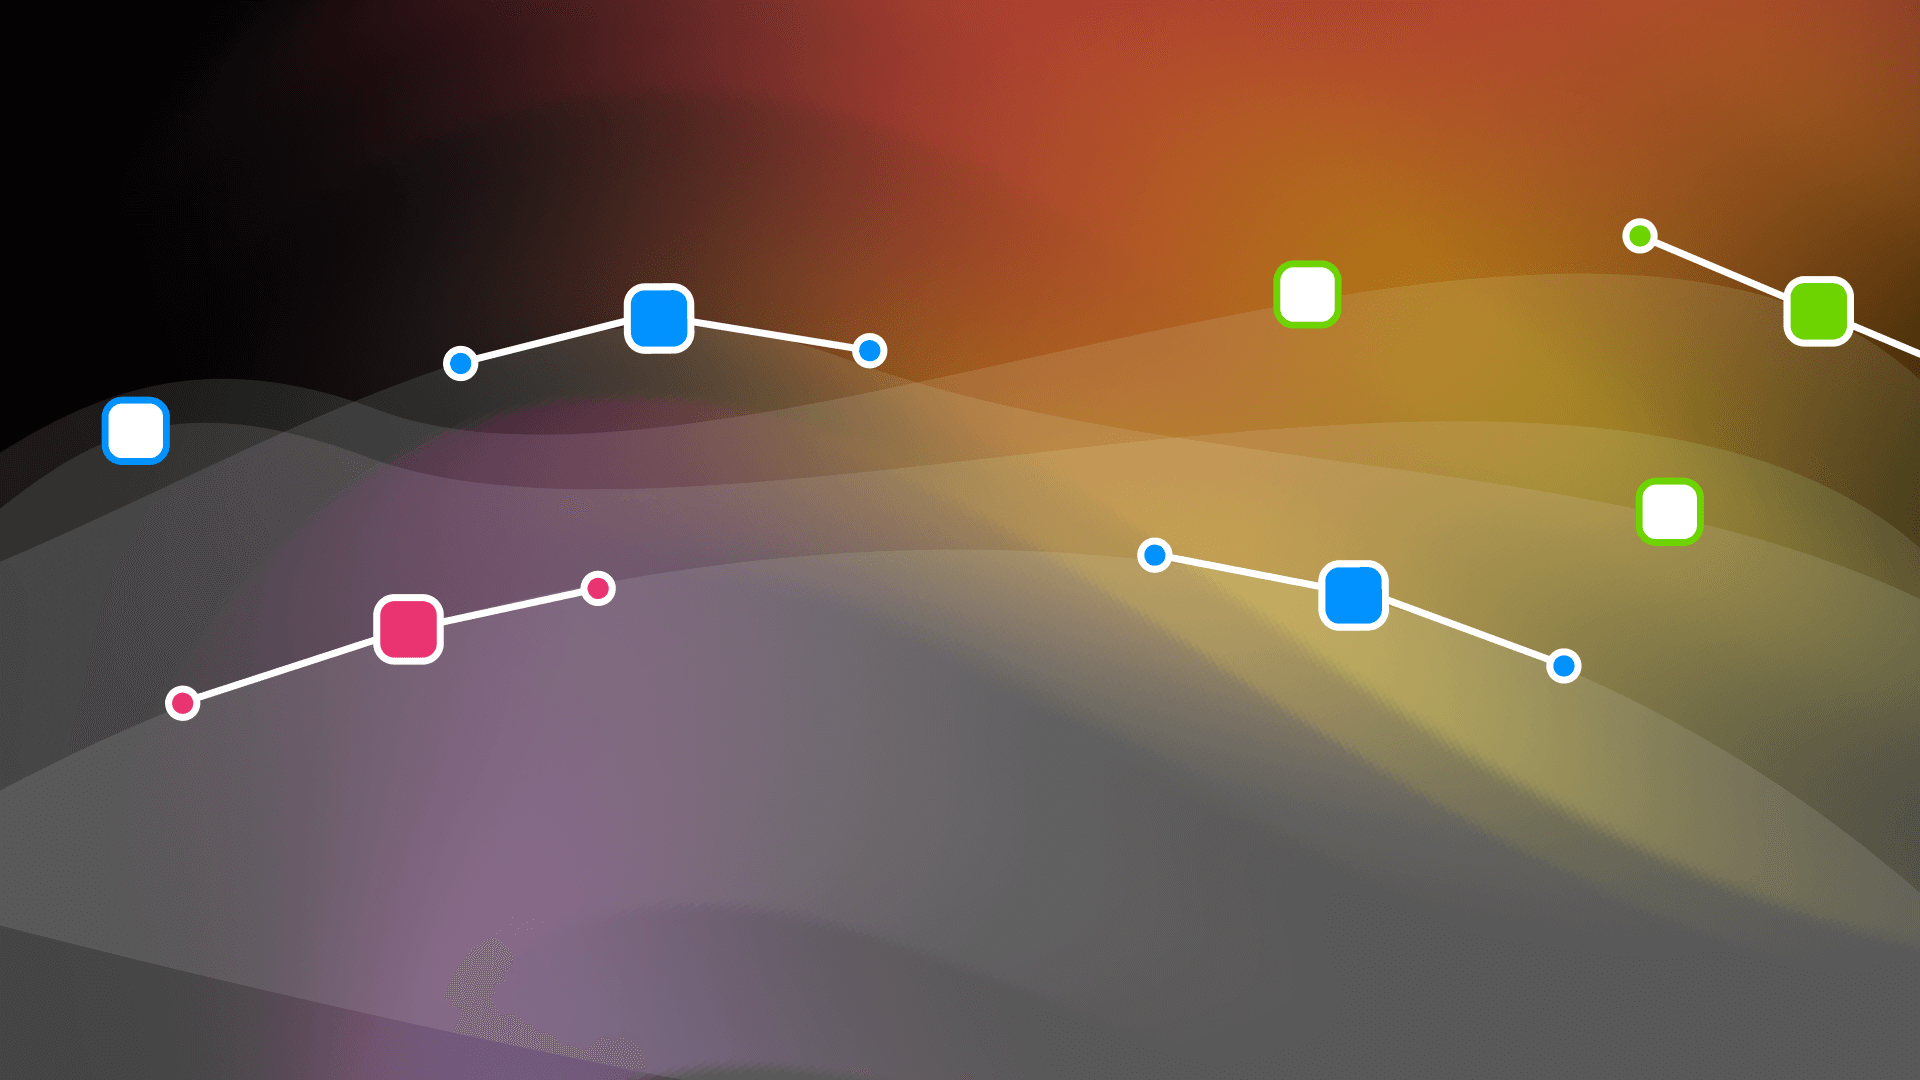 Nodes: redesigned | Linearity